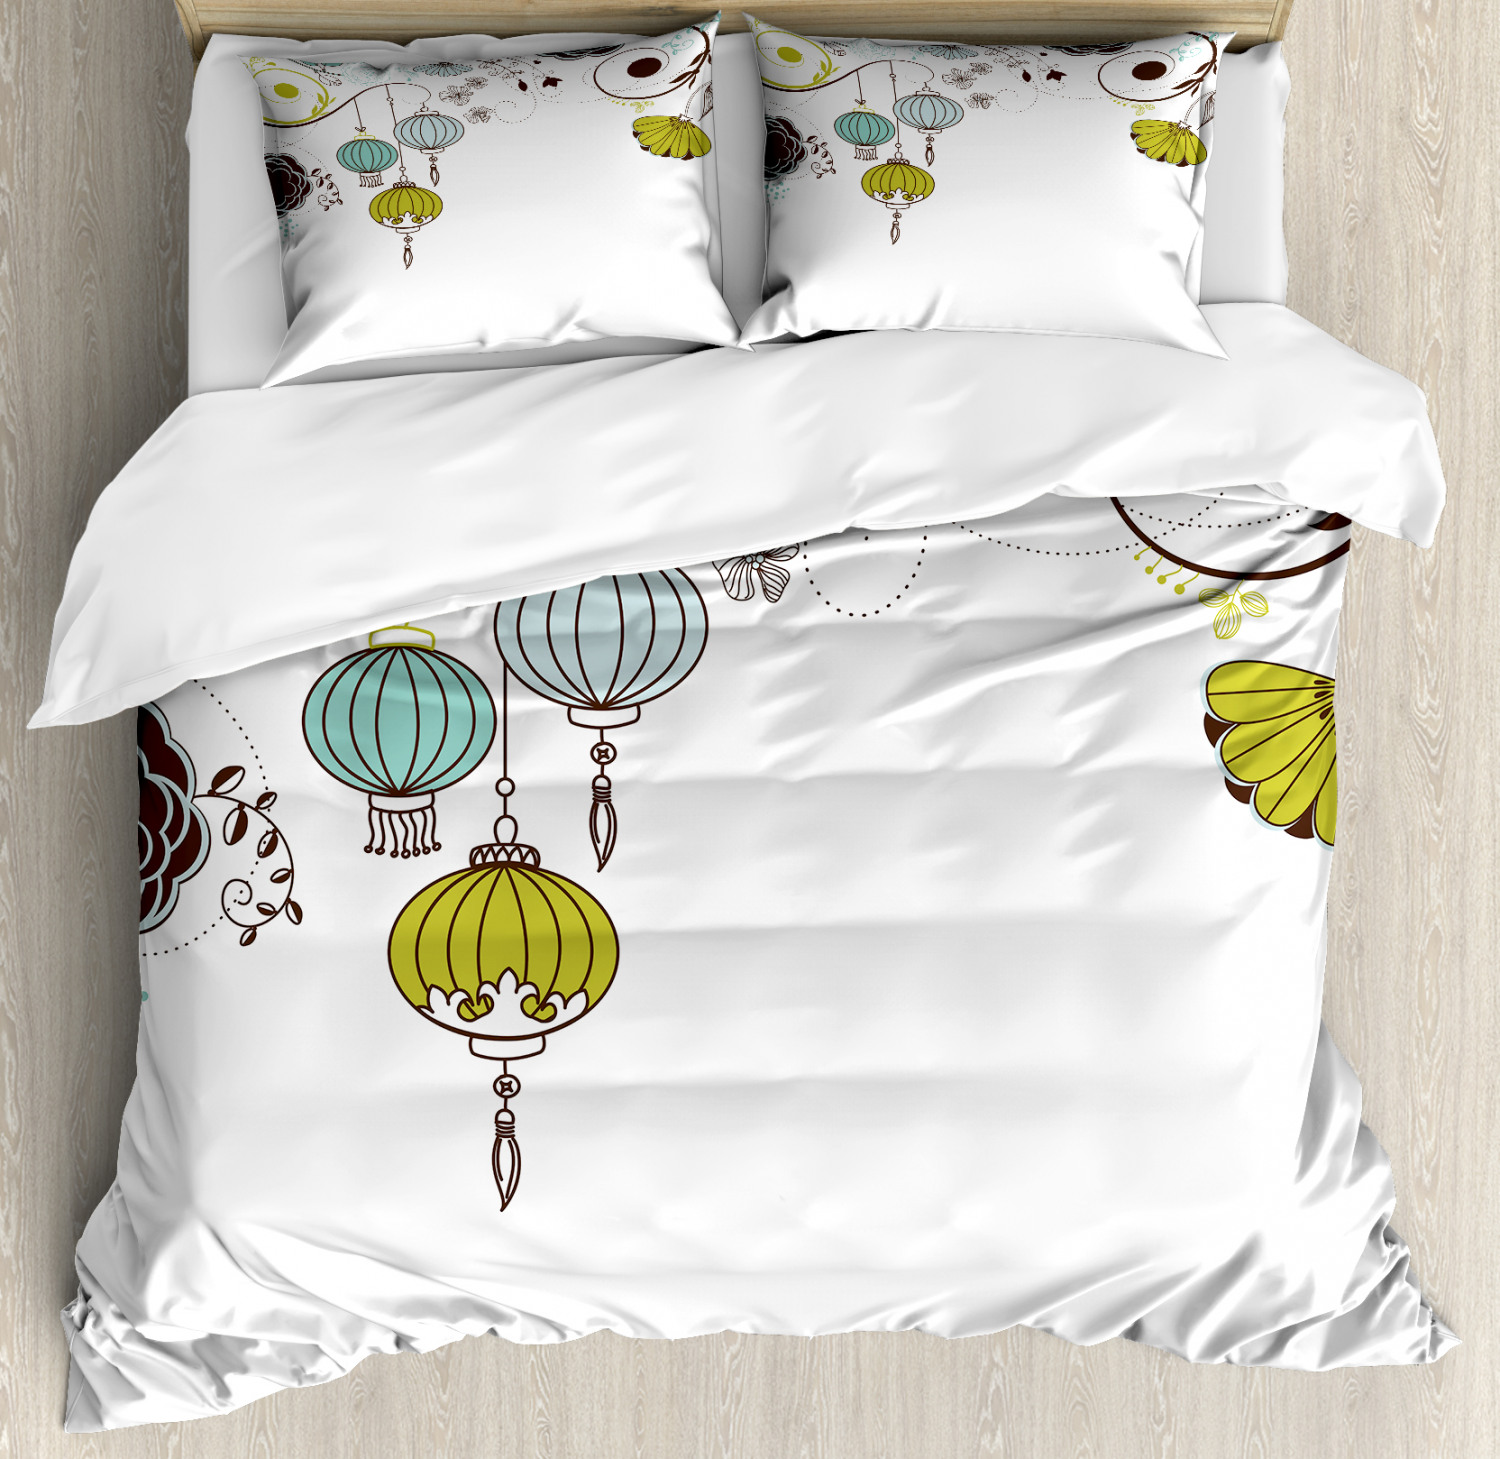 Lantern Duvet Cover Set with Pillow Shams Chinese Abstract Art Print 